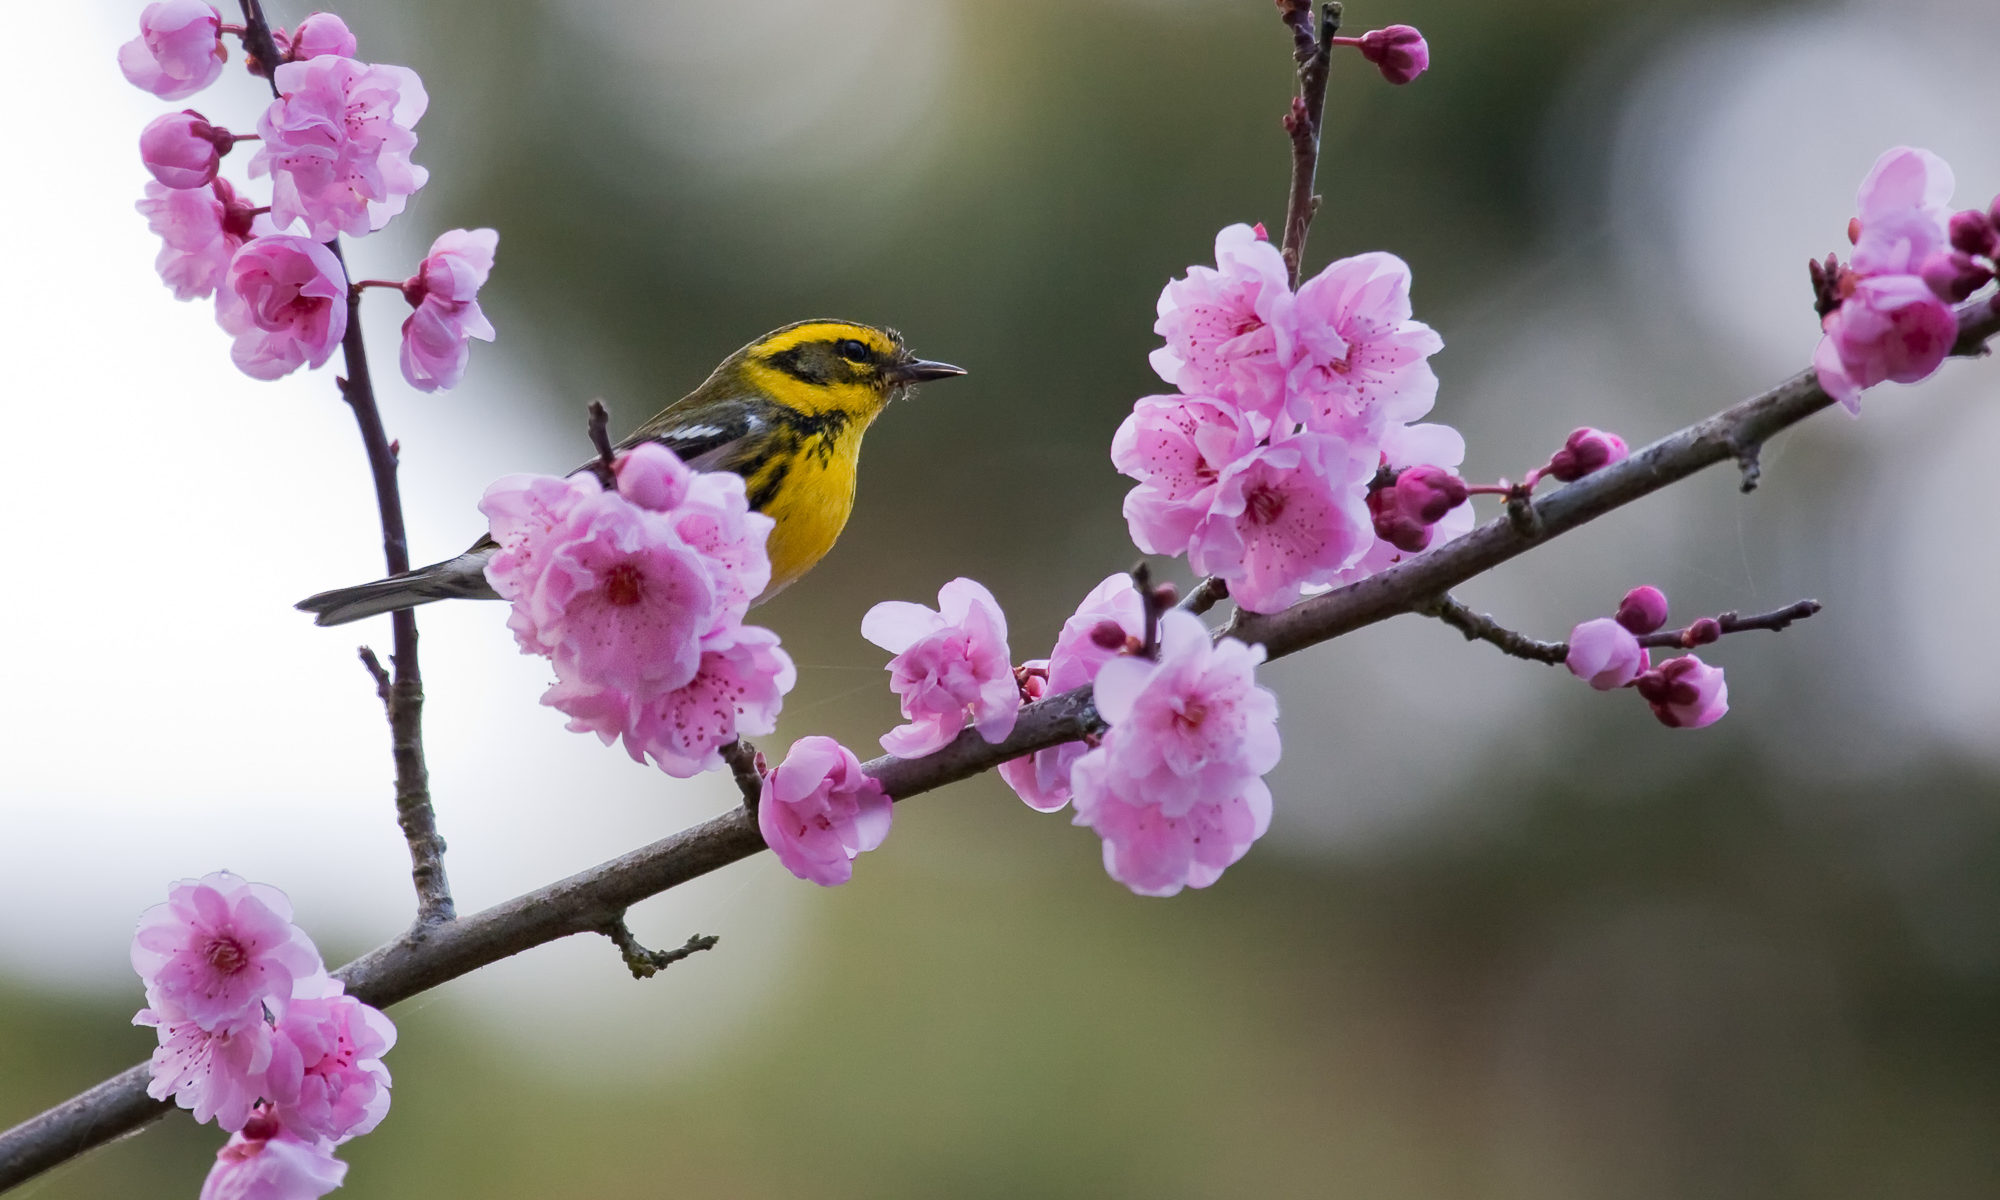 A townsend's warbler sits atop a cherry blossom, Pacific Grove, CA.